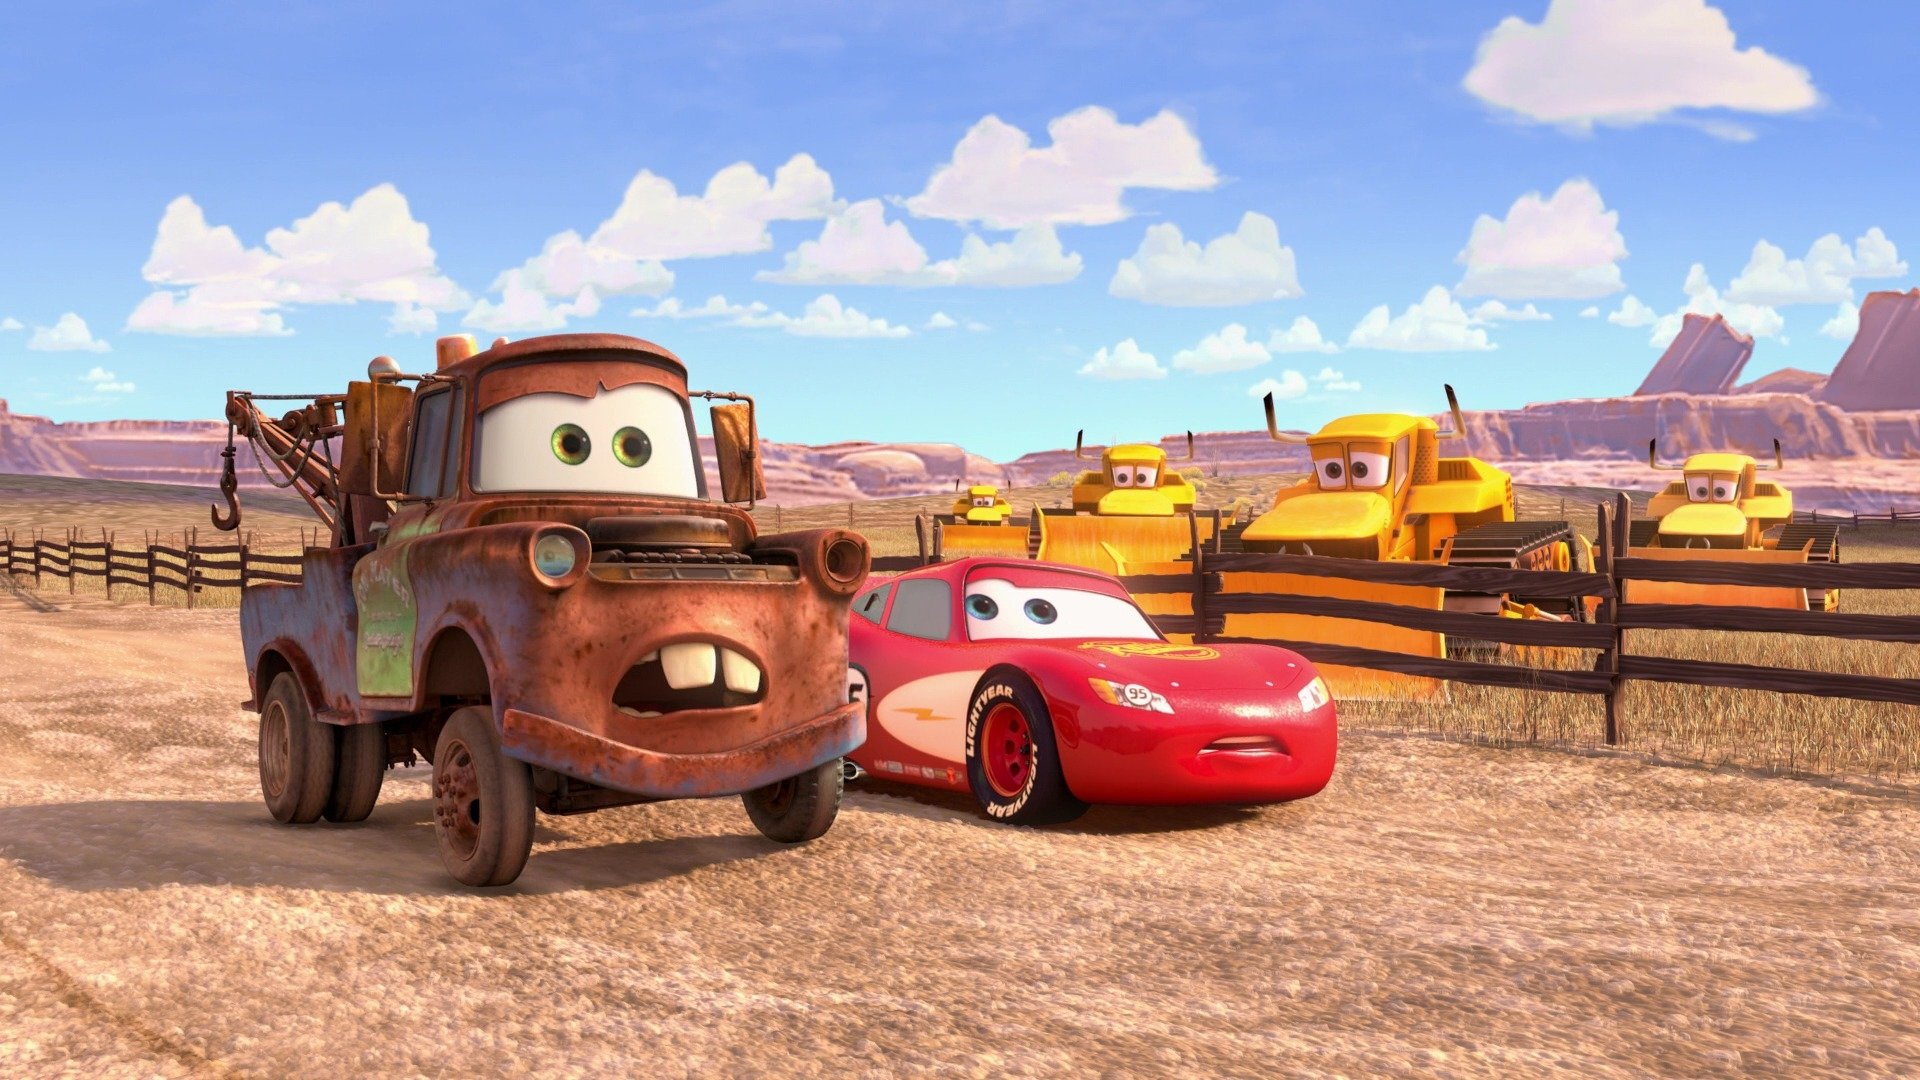 movie-cars-toons-mater-s-tall-tales-hd-wallpaper